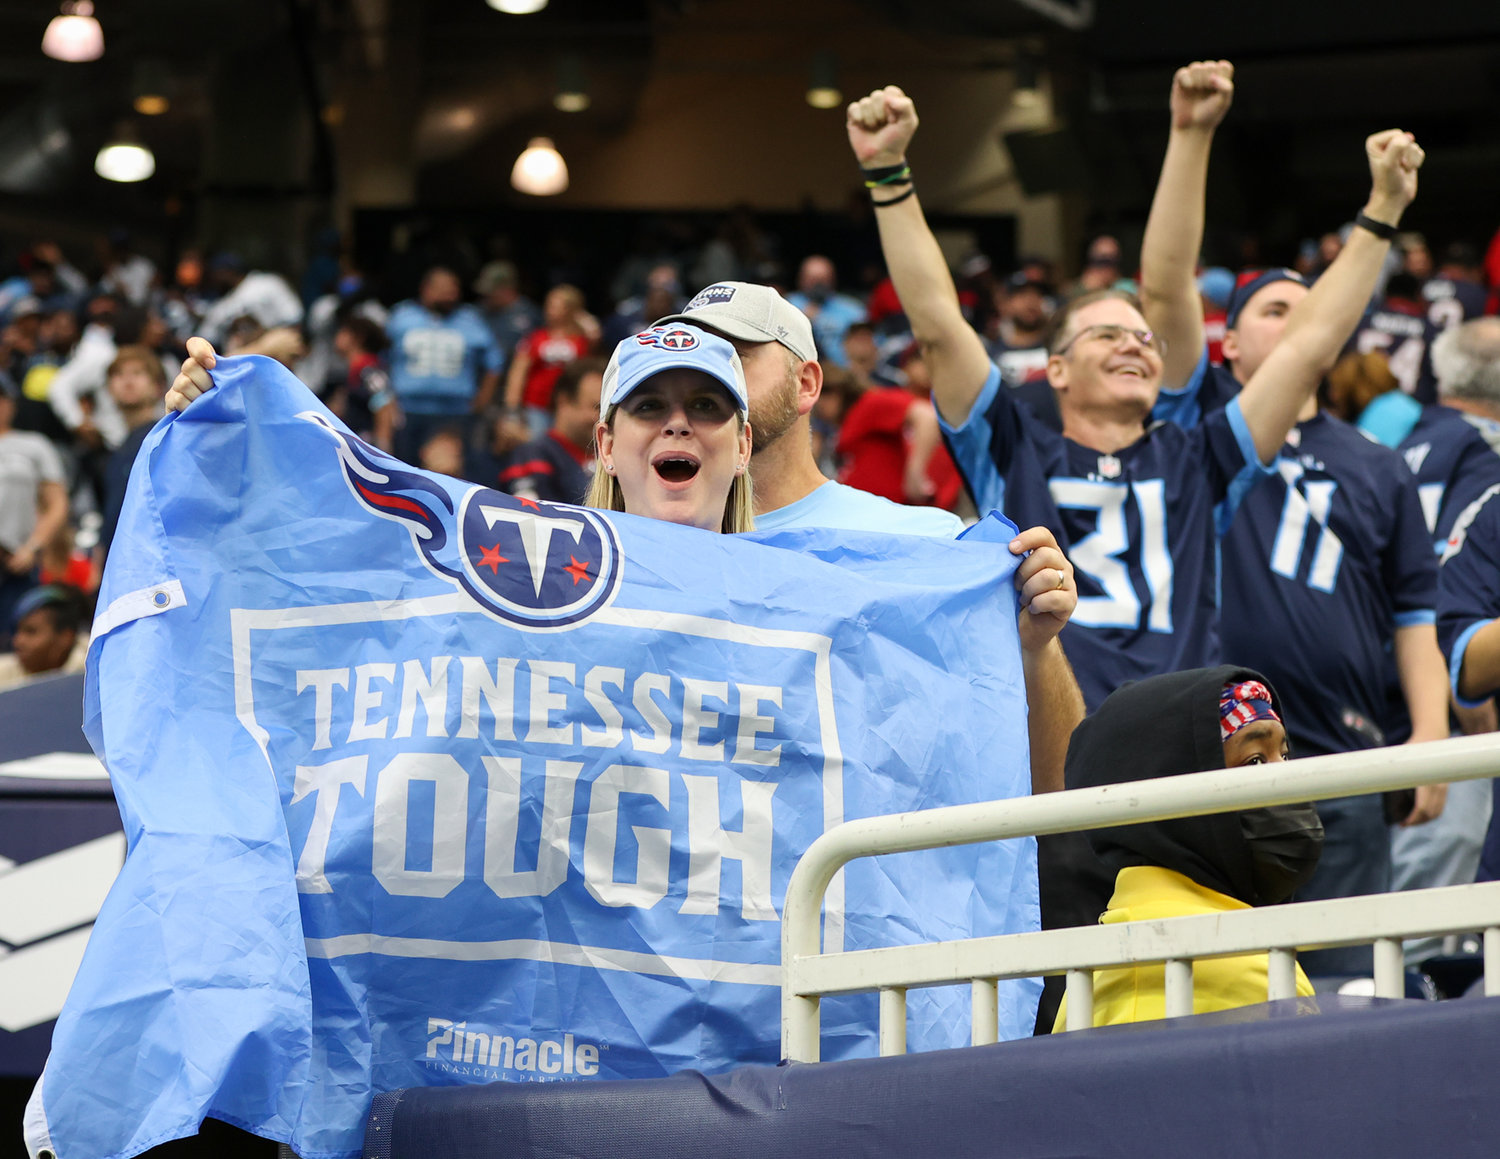 Tennessee Titans fans celebrate a 28-25 win over the Houston Texans, clinching home field advantage and a first-round bye in the playoffs, on Jan. 9, 2022 in Houston, Texas. The Titans won, 28-25.